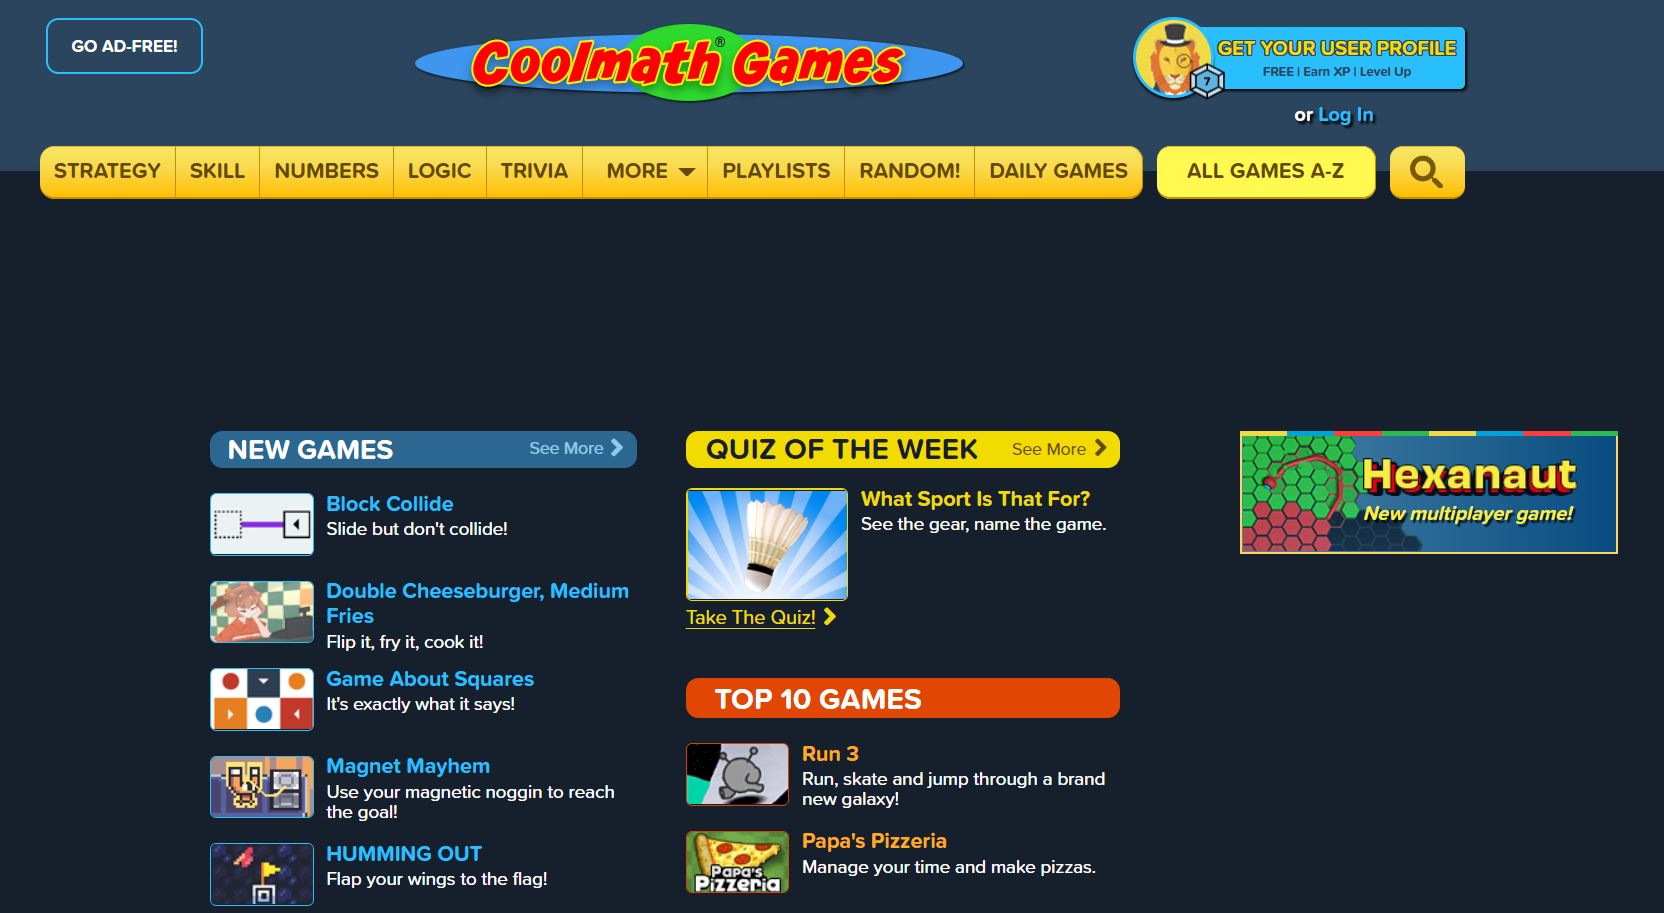 Coolmathgames.com - A Chance To Challenge Your Brain And Creativity